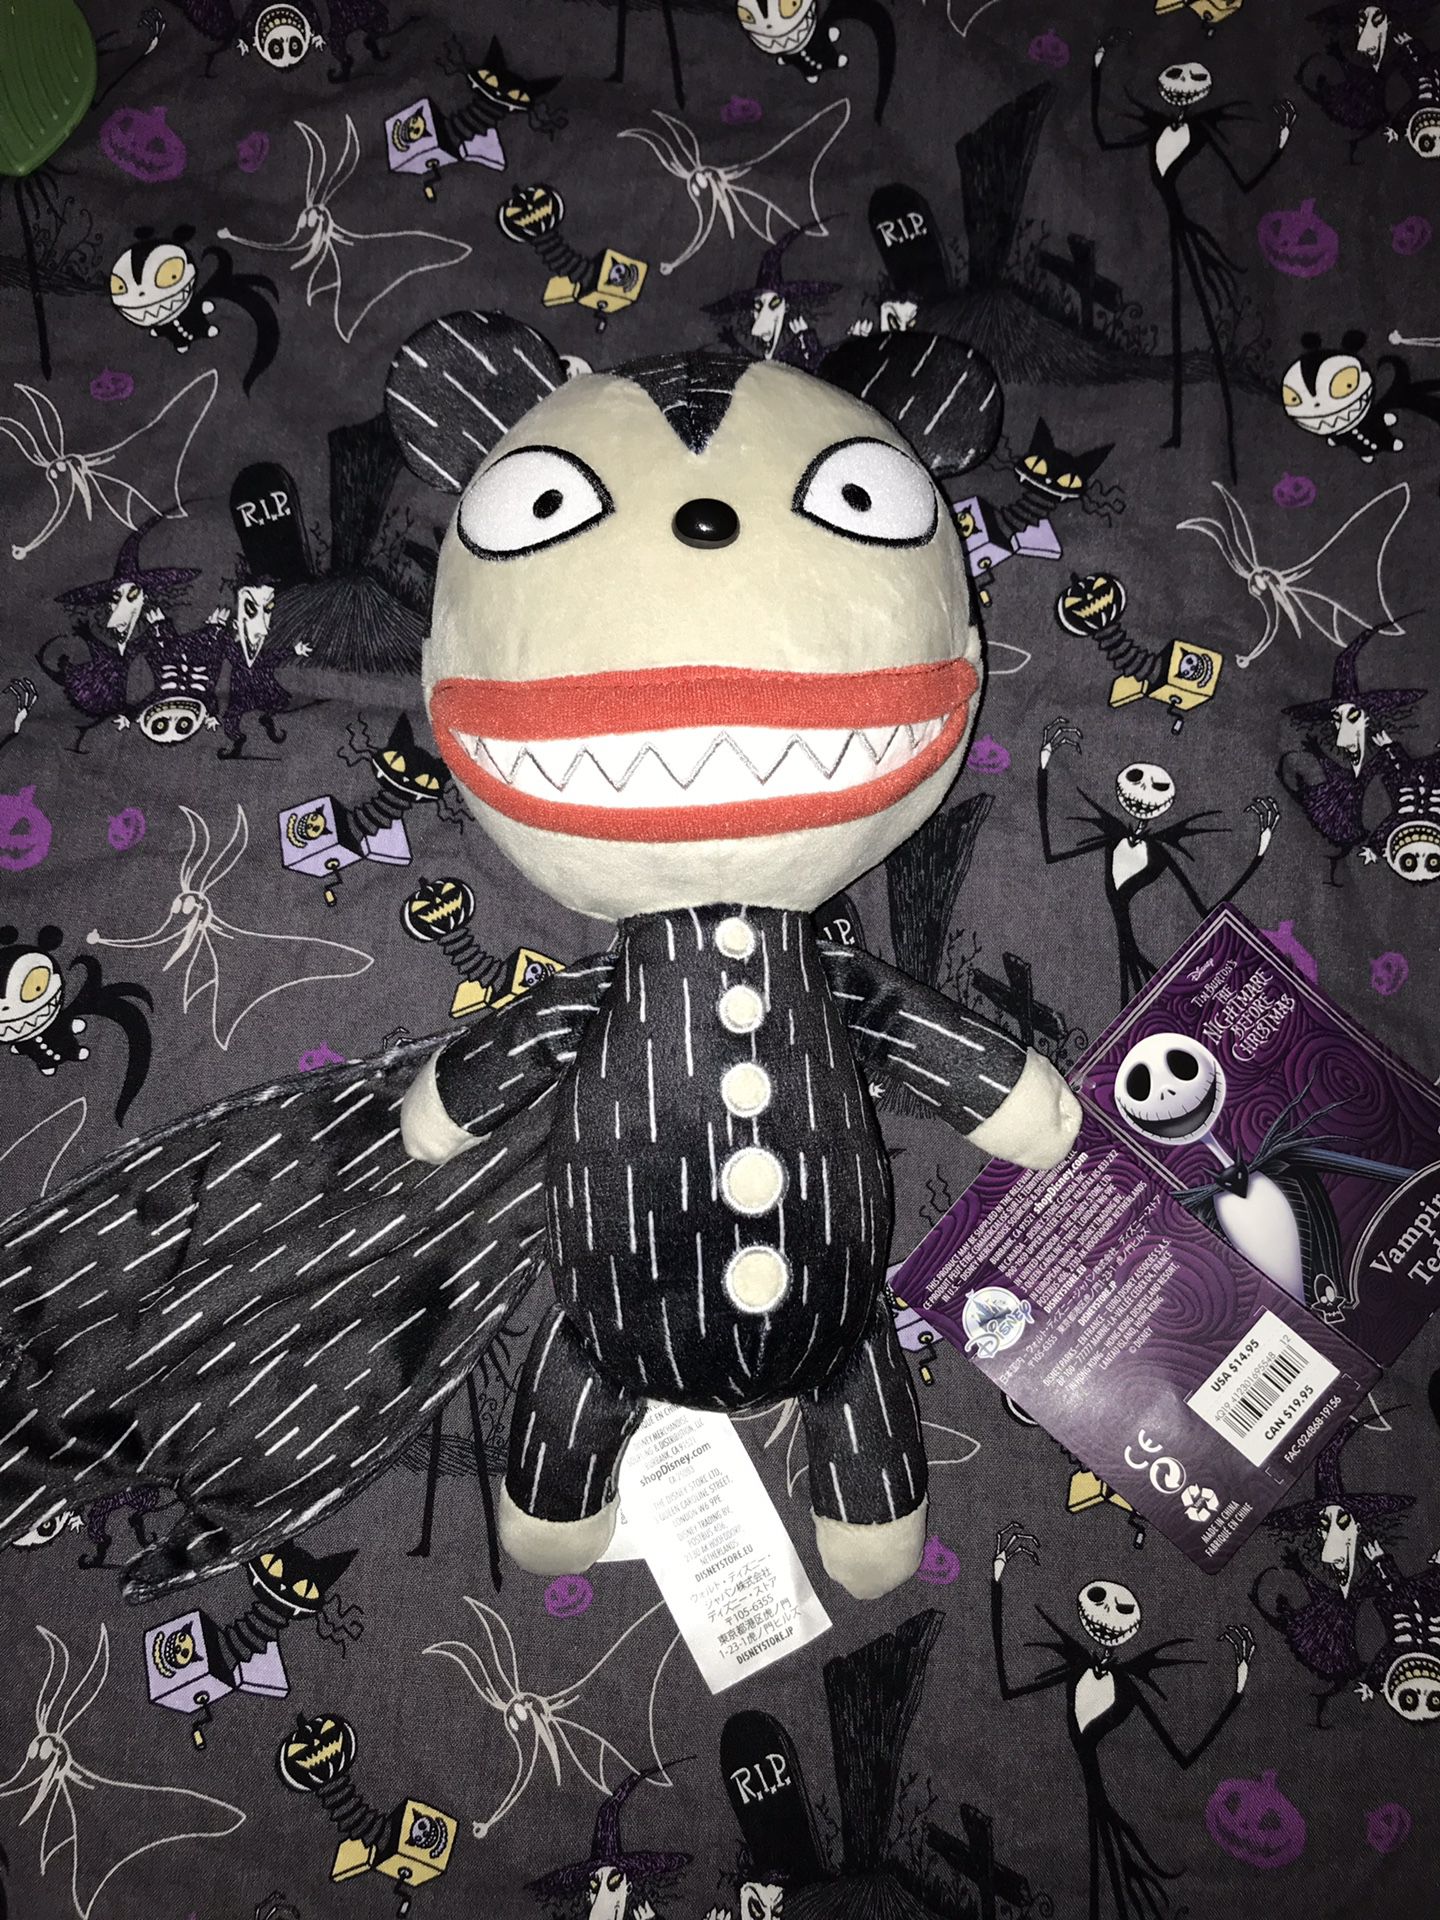 Scary Vampire Teddy plush from Nightmare Before Christmas